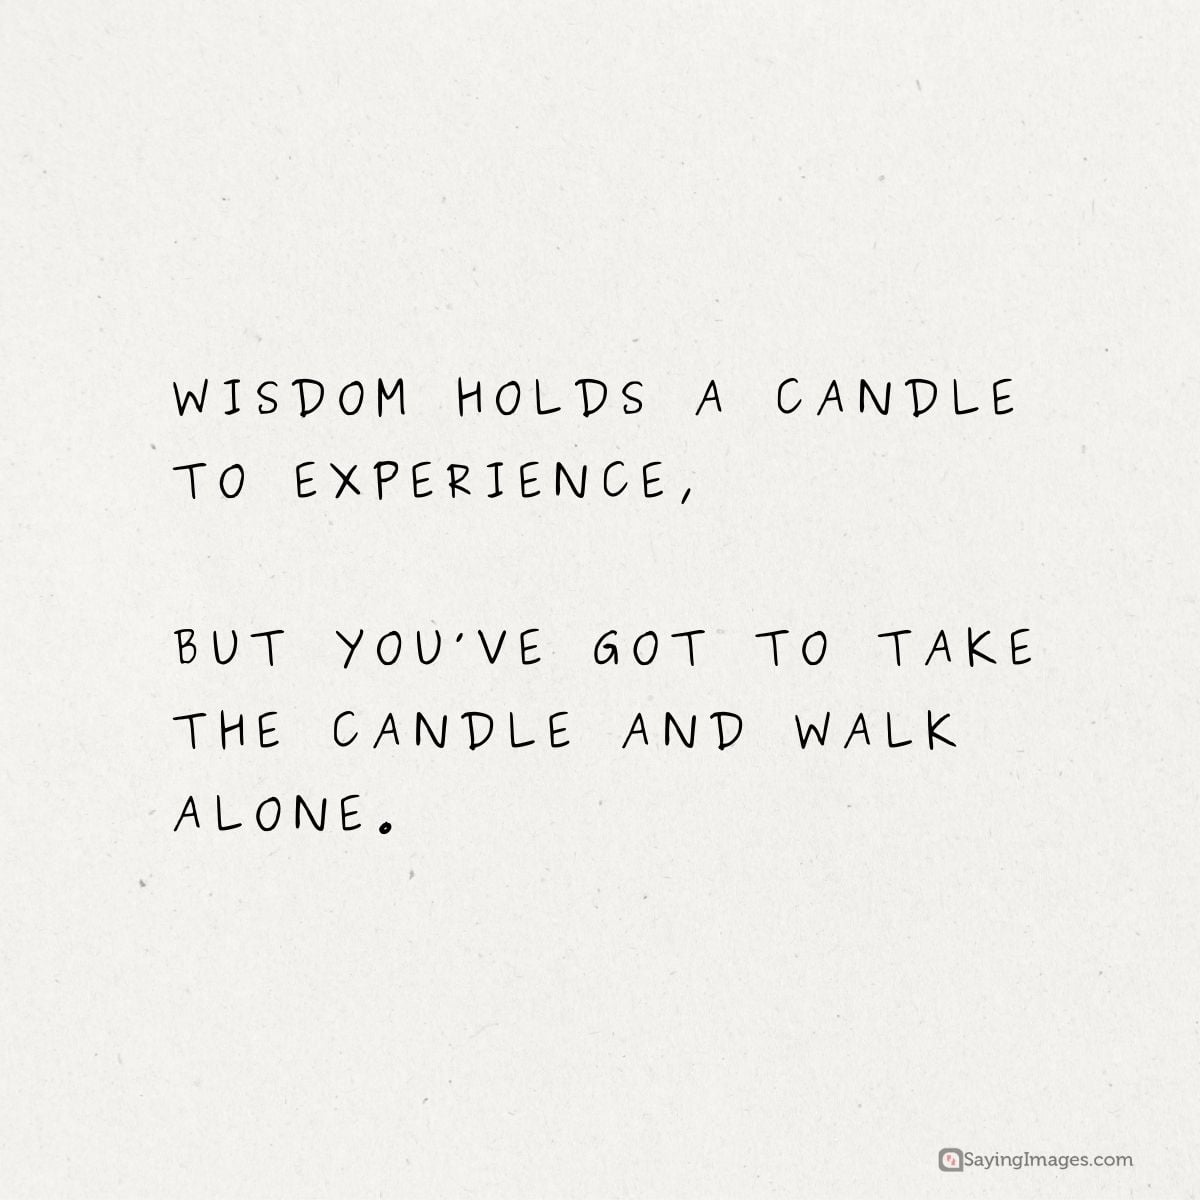 Wisdom holds a candle to experience, but you've got to take the candle and walk alone.